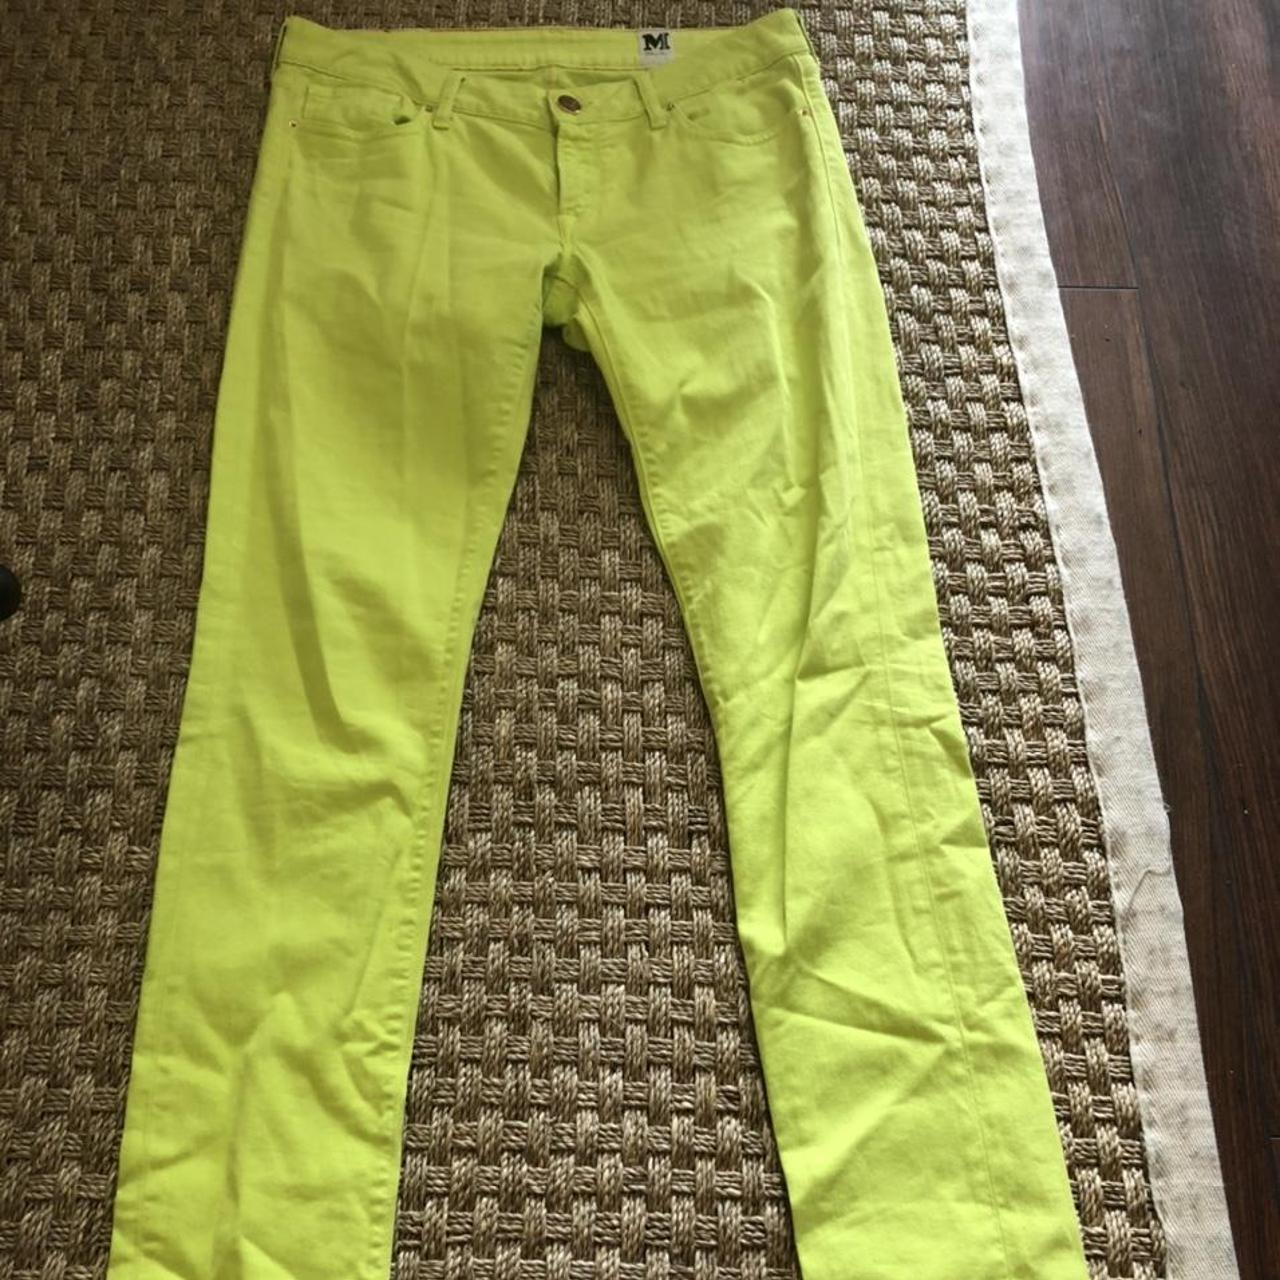 Missoni Women's Green and Gold Jeans